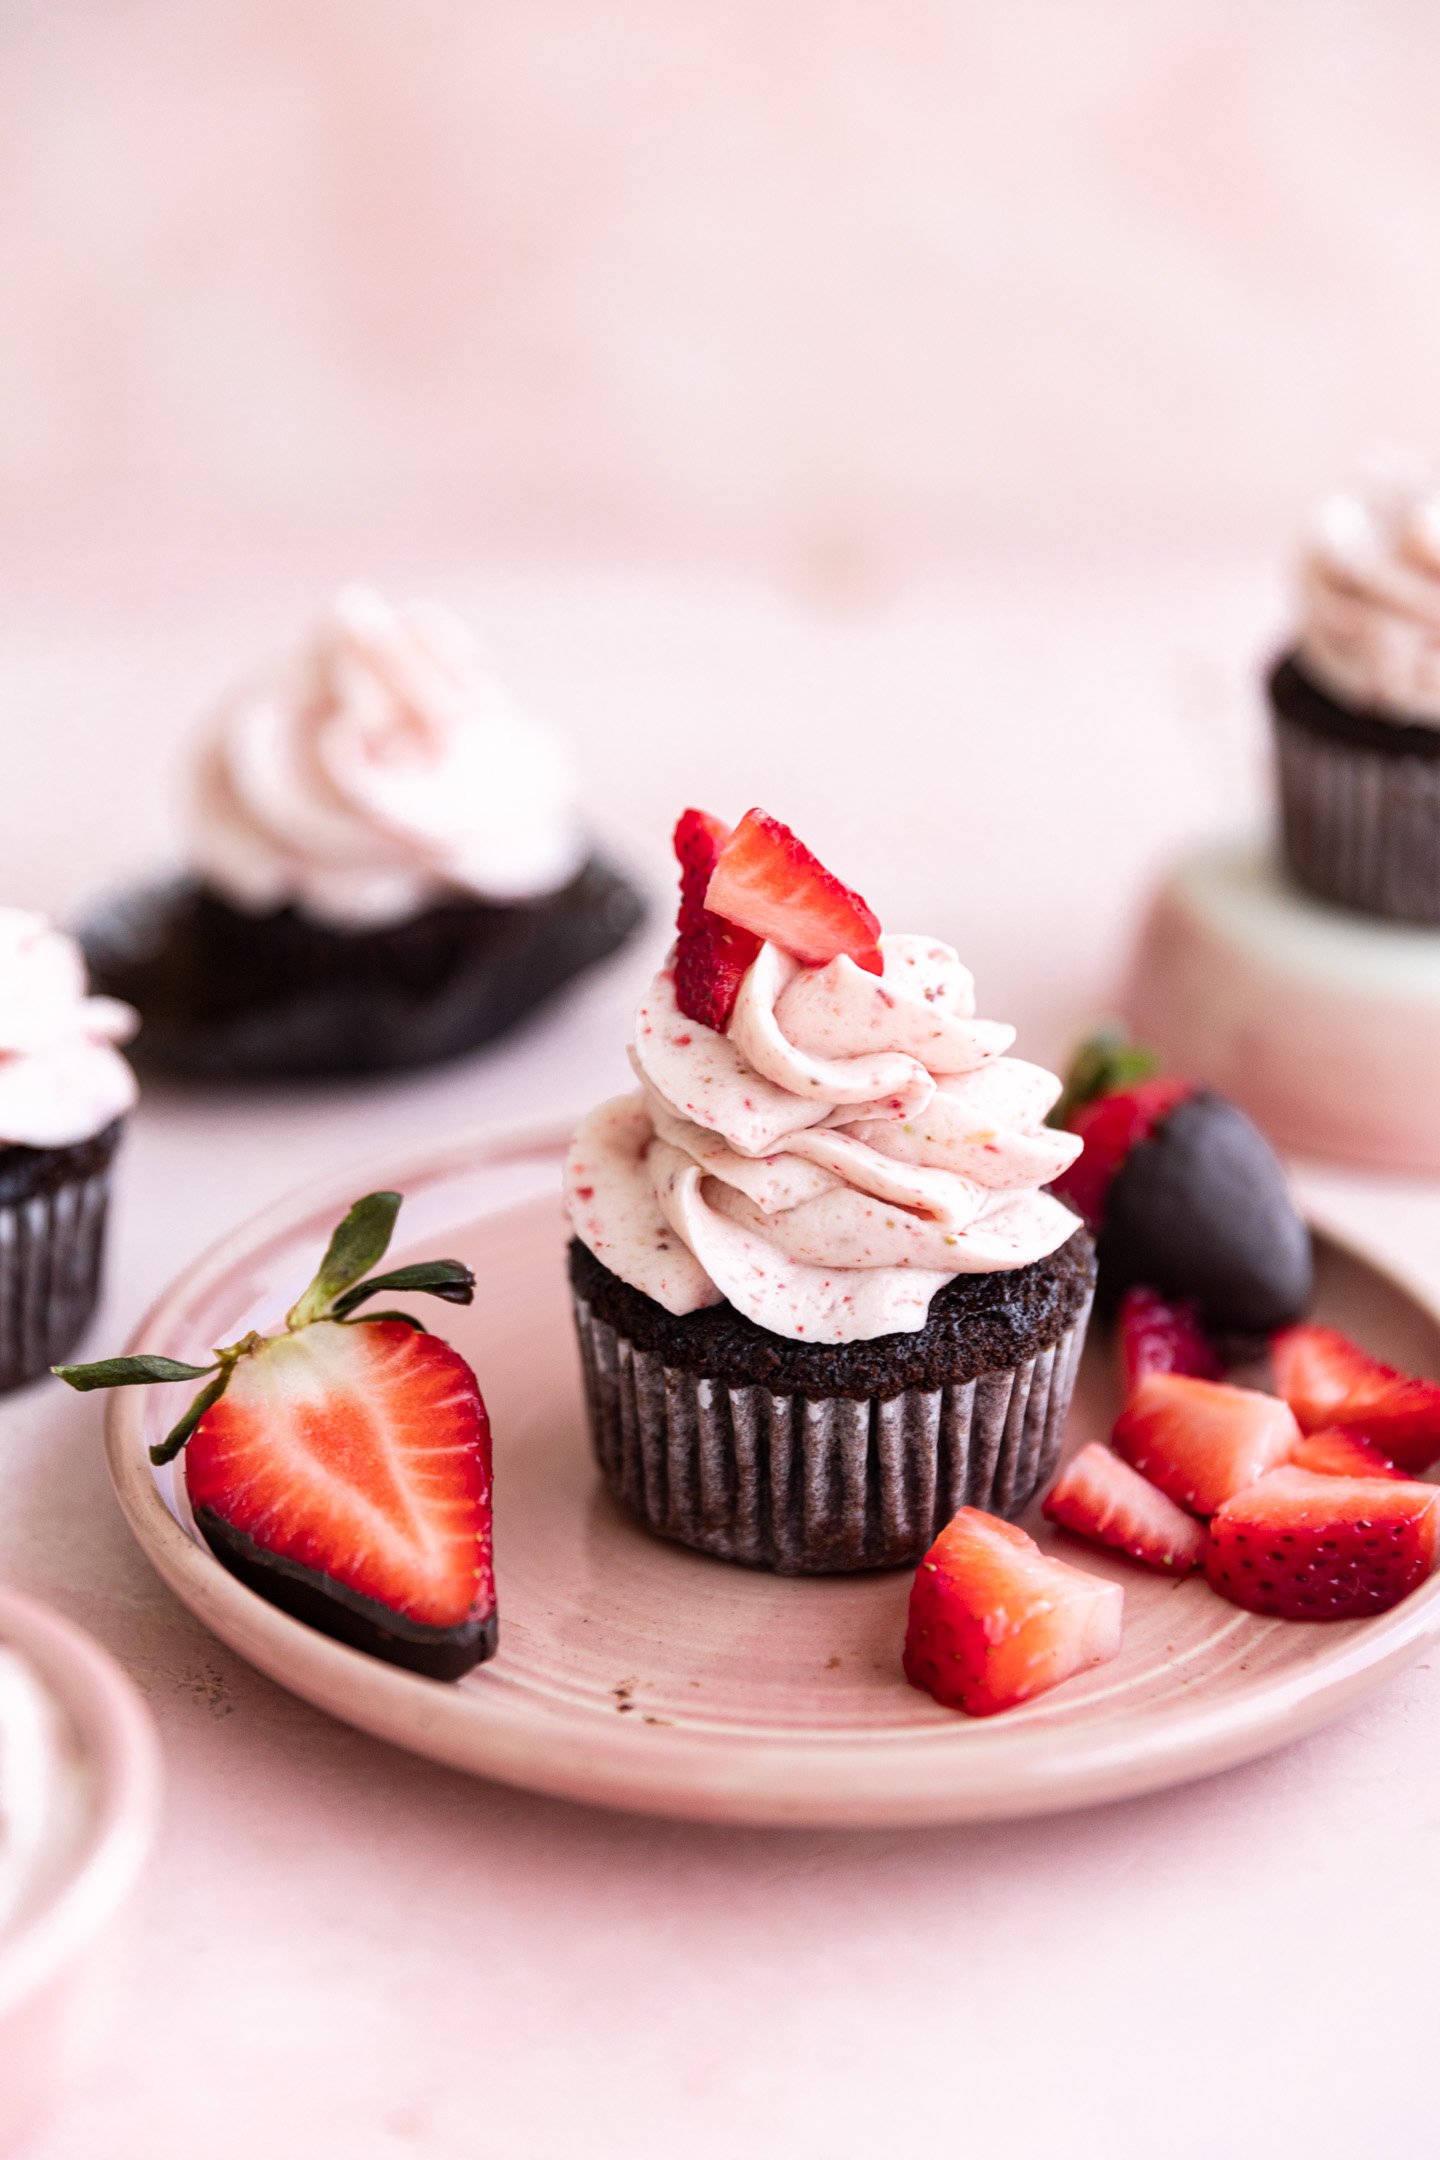 Chocolate strawberry cupcakes topped with fresh berries on a pink plate.